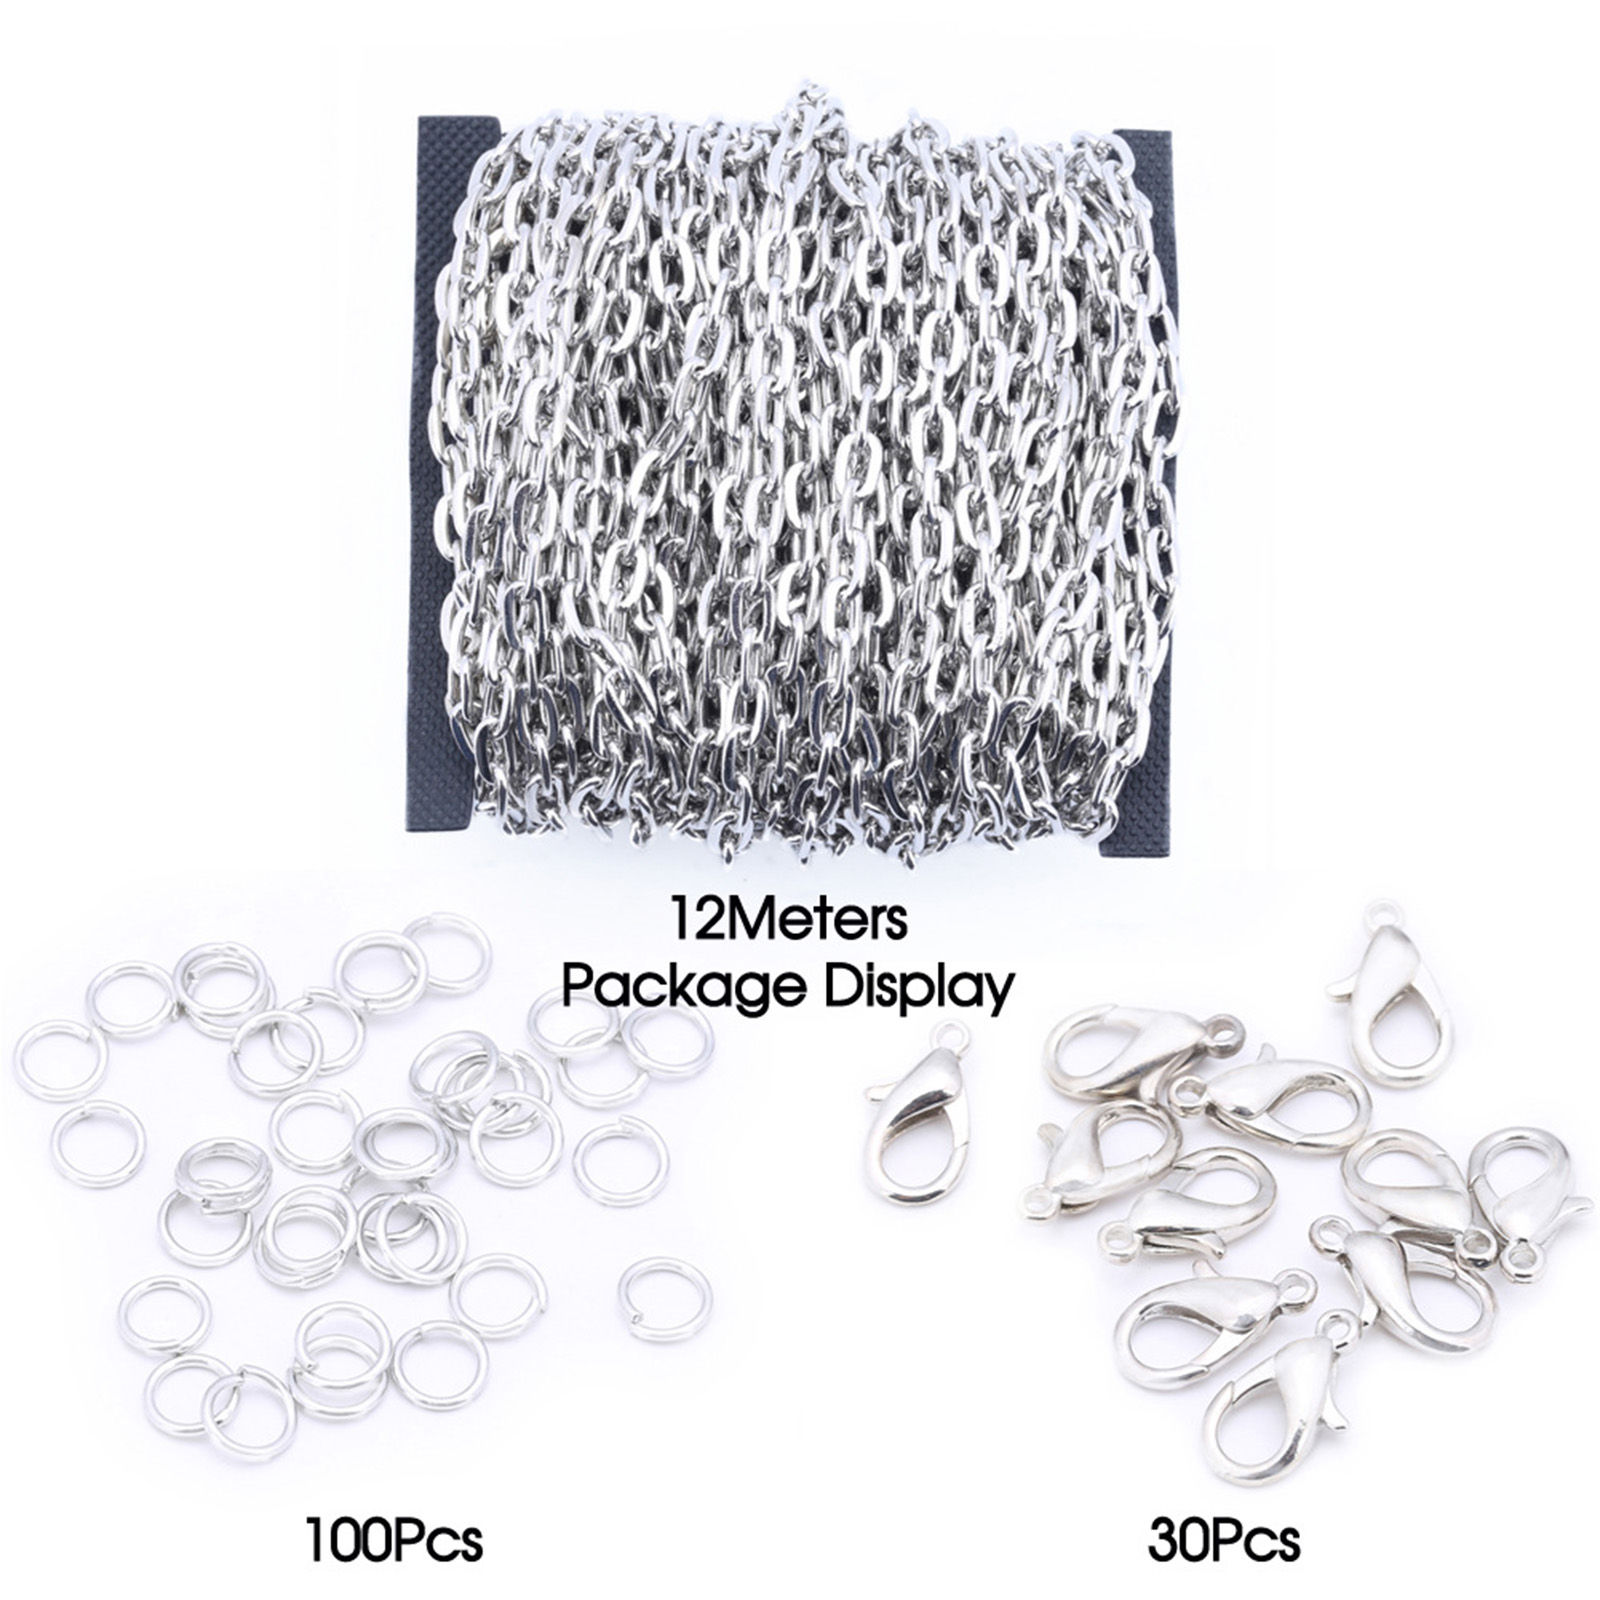 Picture of Iron Based Alloy Jewelry DIY Earring Necklace Bracelet 2x1.5mm Chain Lobster Clasp Jump Ring Accessories Findings Silver Tone 15cm x 12cm, 1 Set